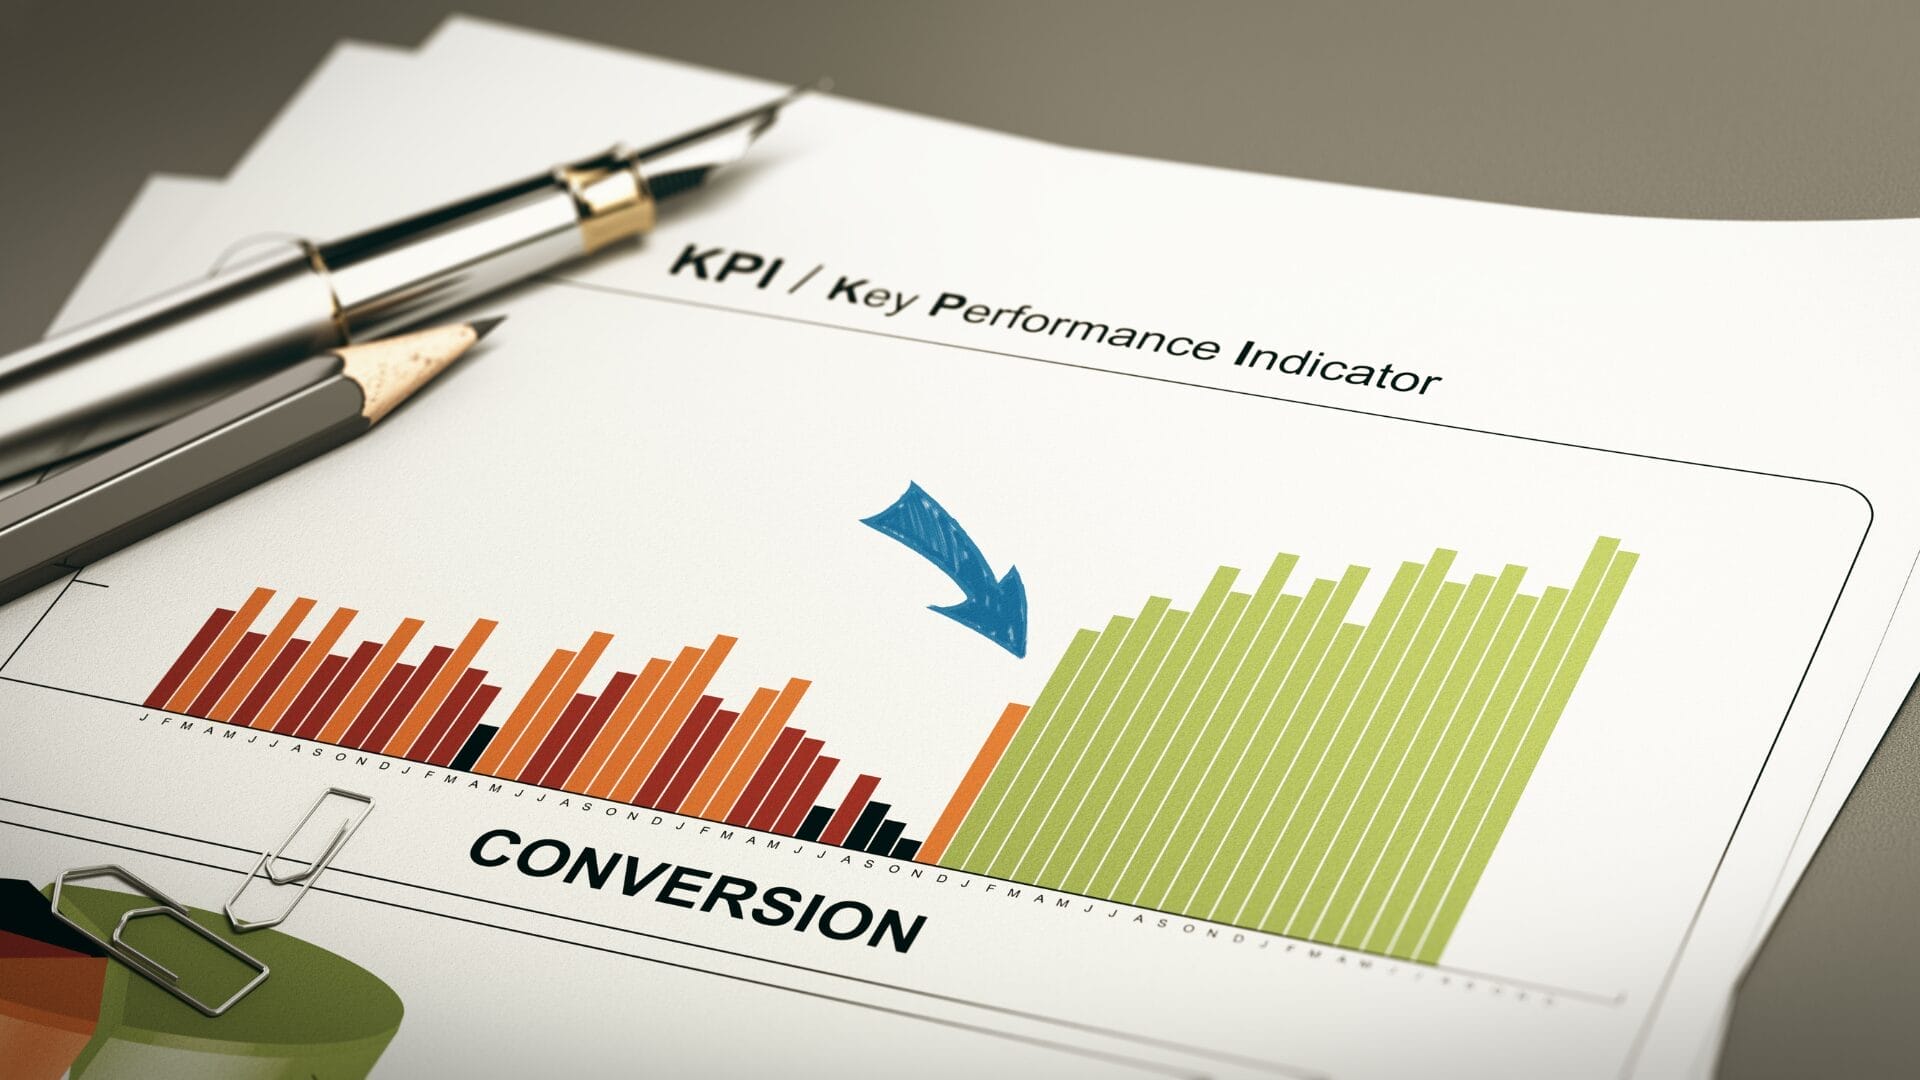 What is a Conversion Rate and Why is it Important?